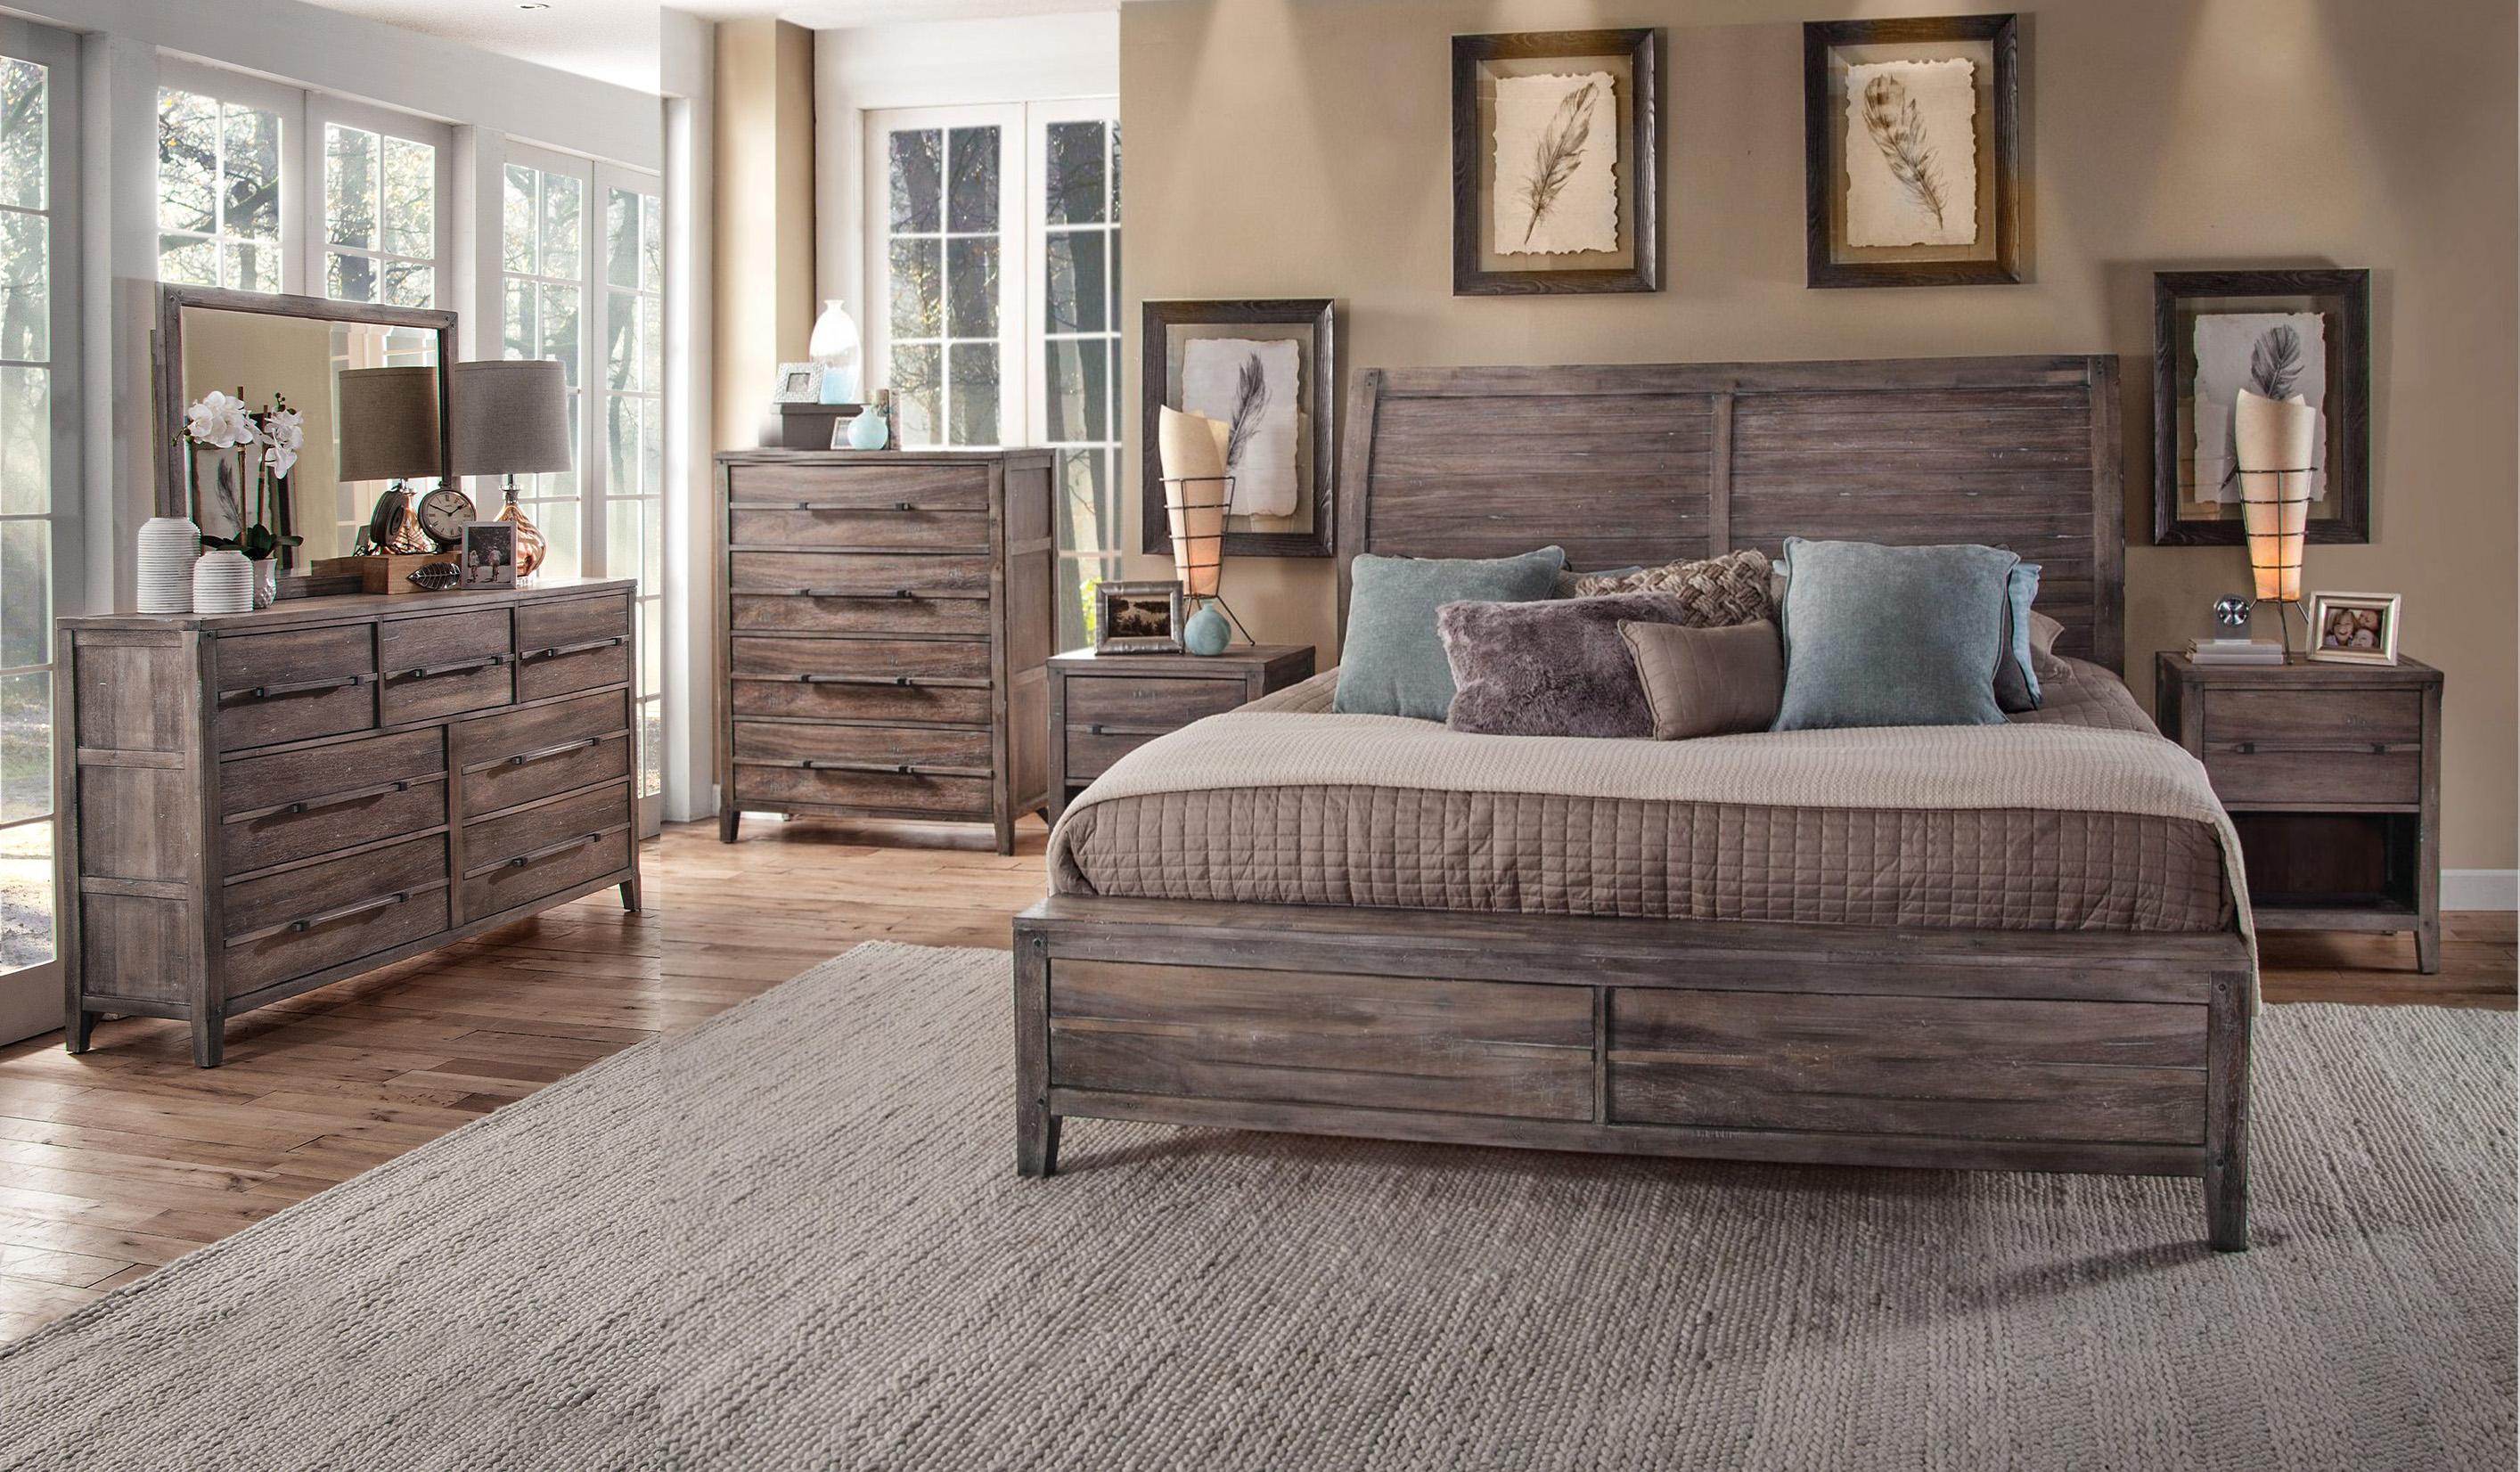 Classic, Traditional Sleigh Bedroom Set AURORA 2800-50SLP 2800-QSLPN-5PC in Driftwood, Gray 